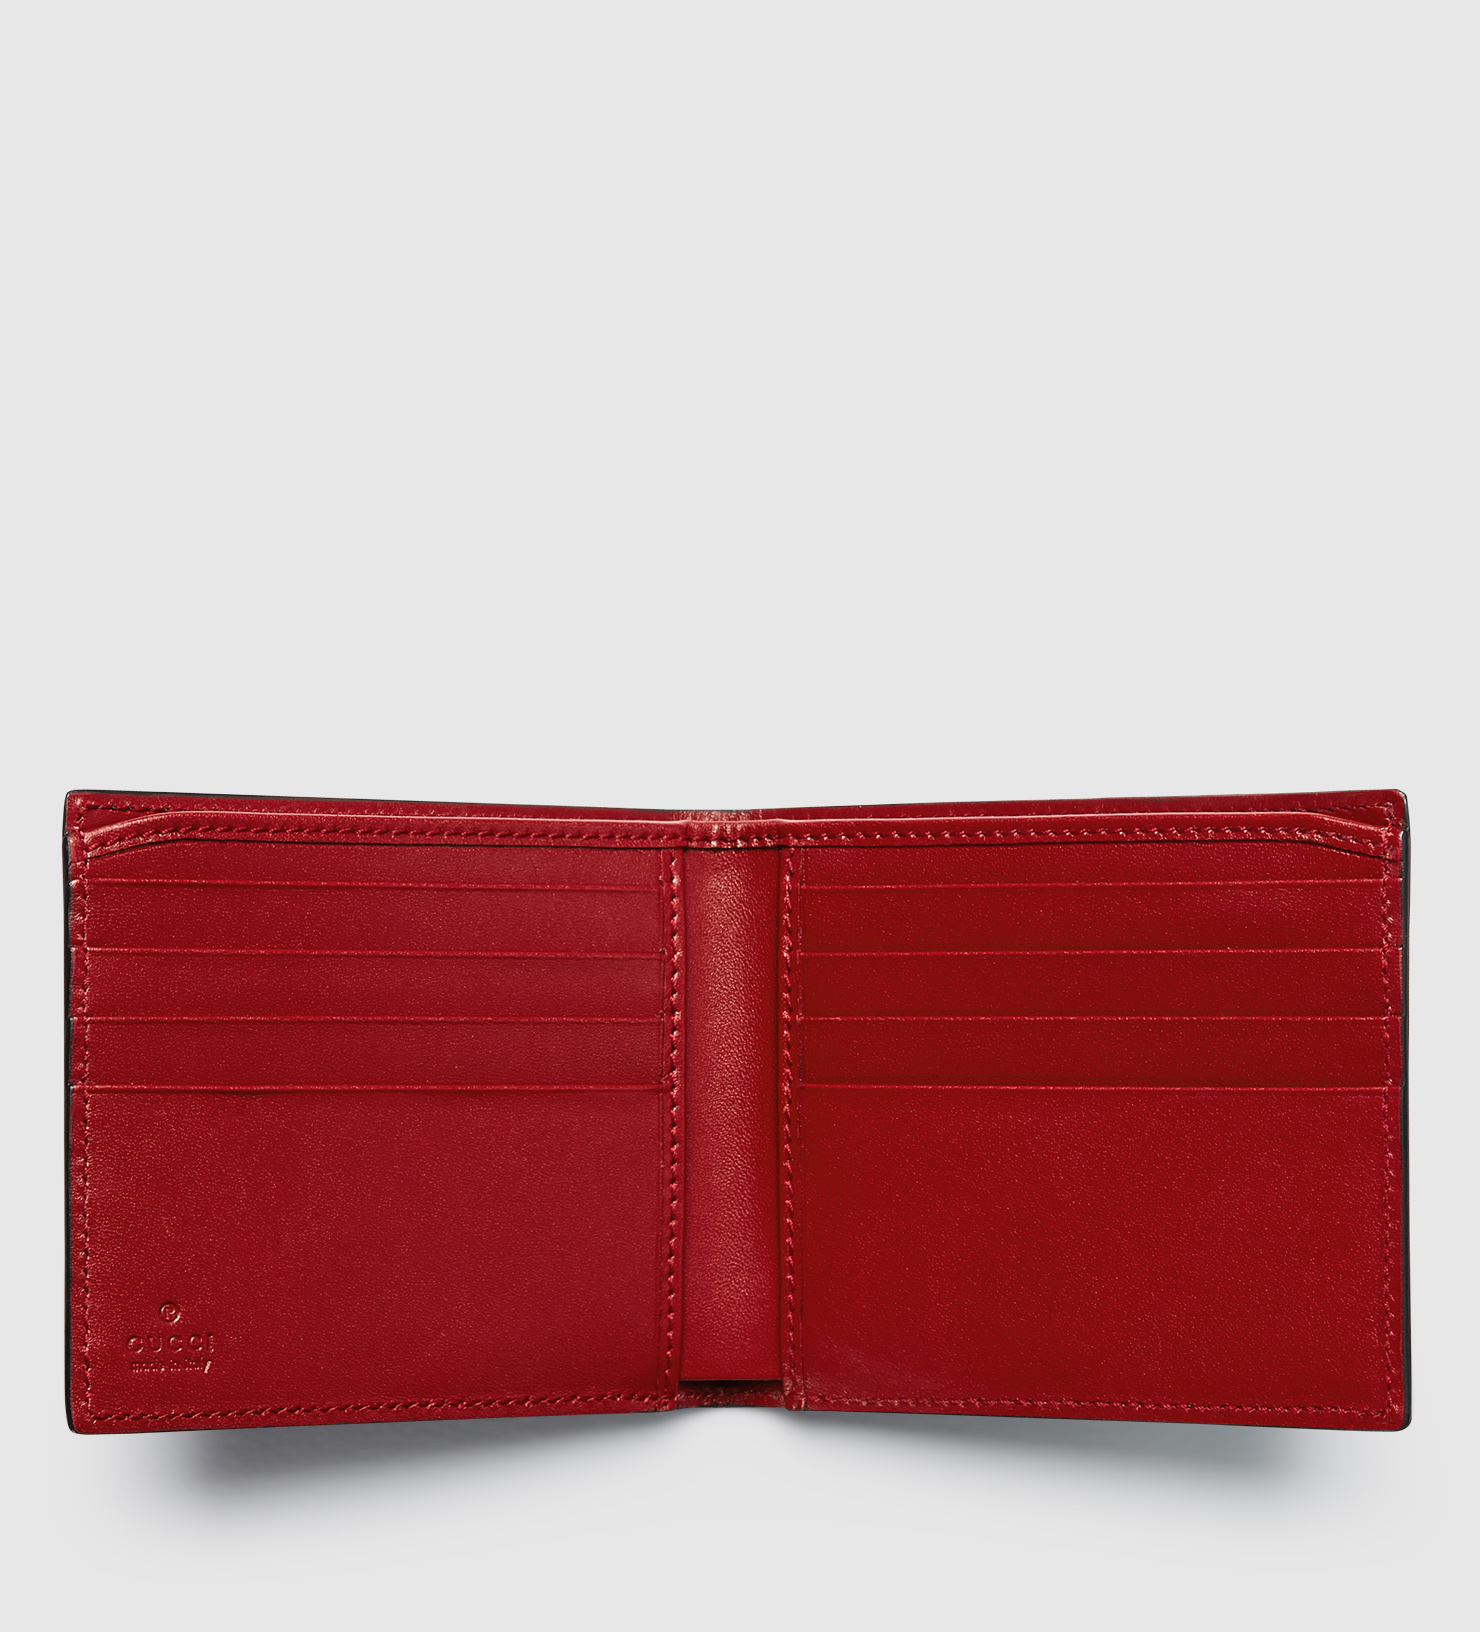 Gucci Leather Two-tone Bi-fold Wallet in Red for Men - Lyst